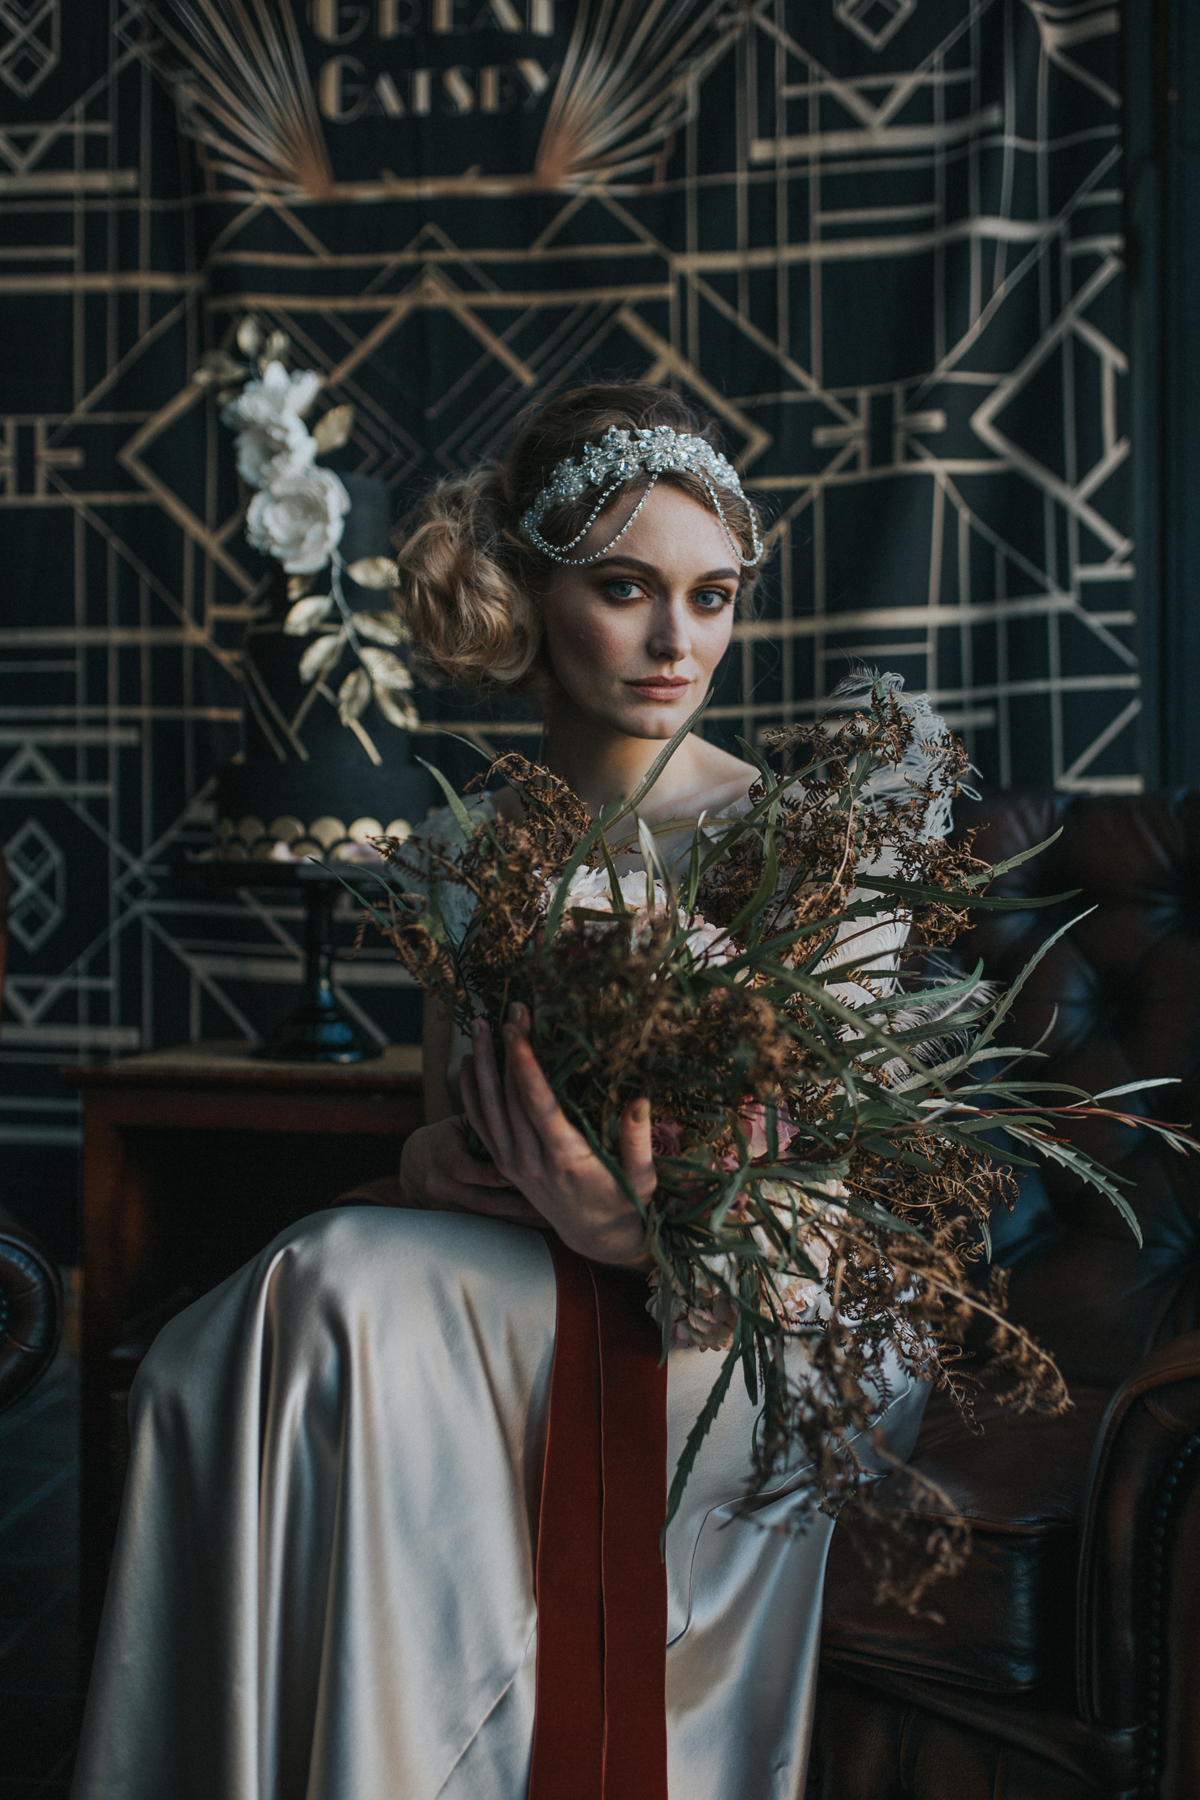 84 Great Gatsby inspired wedding photoshoot featuring Kate Beaumont dresses